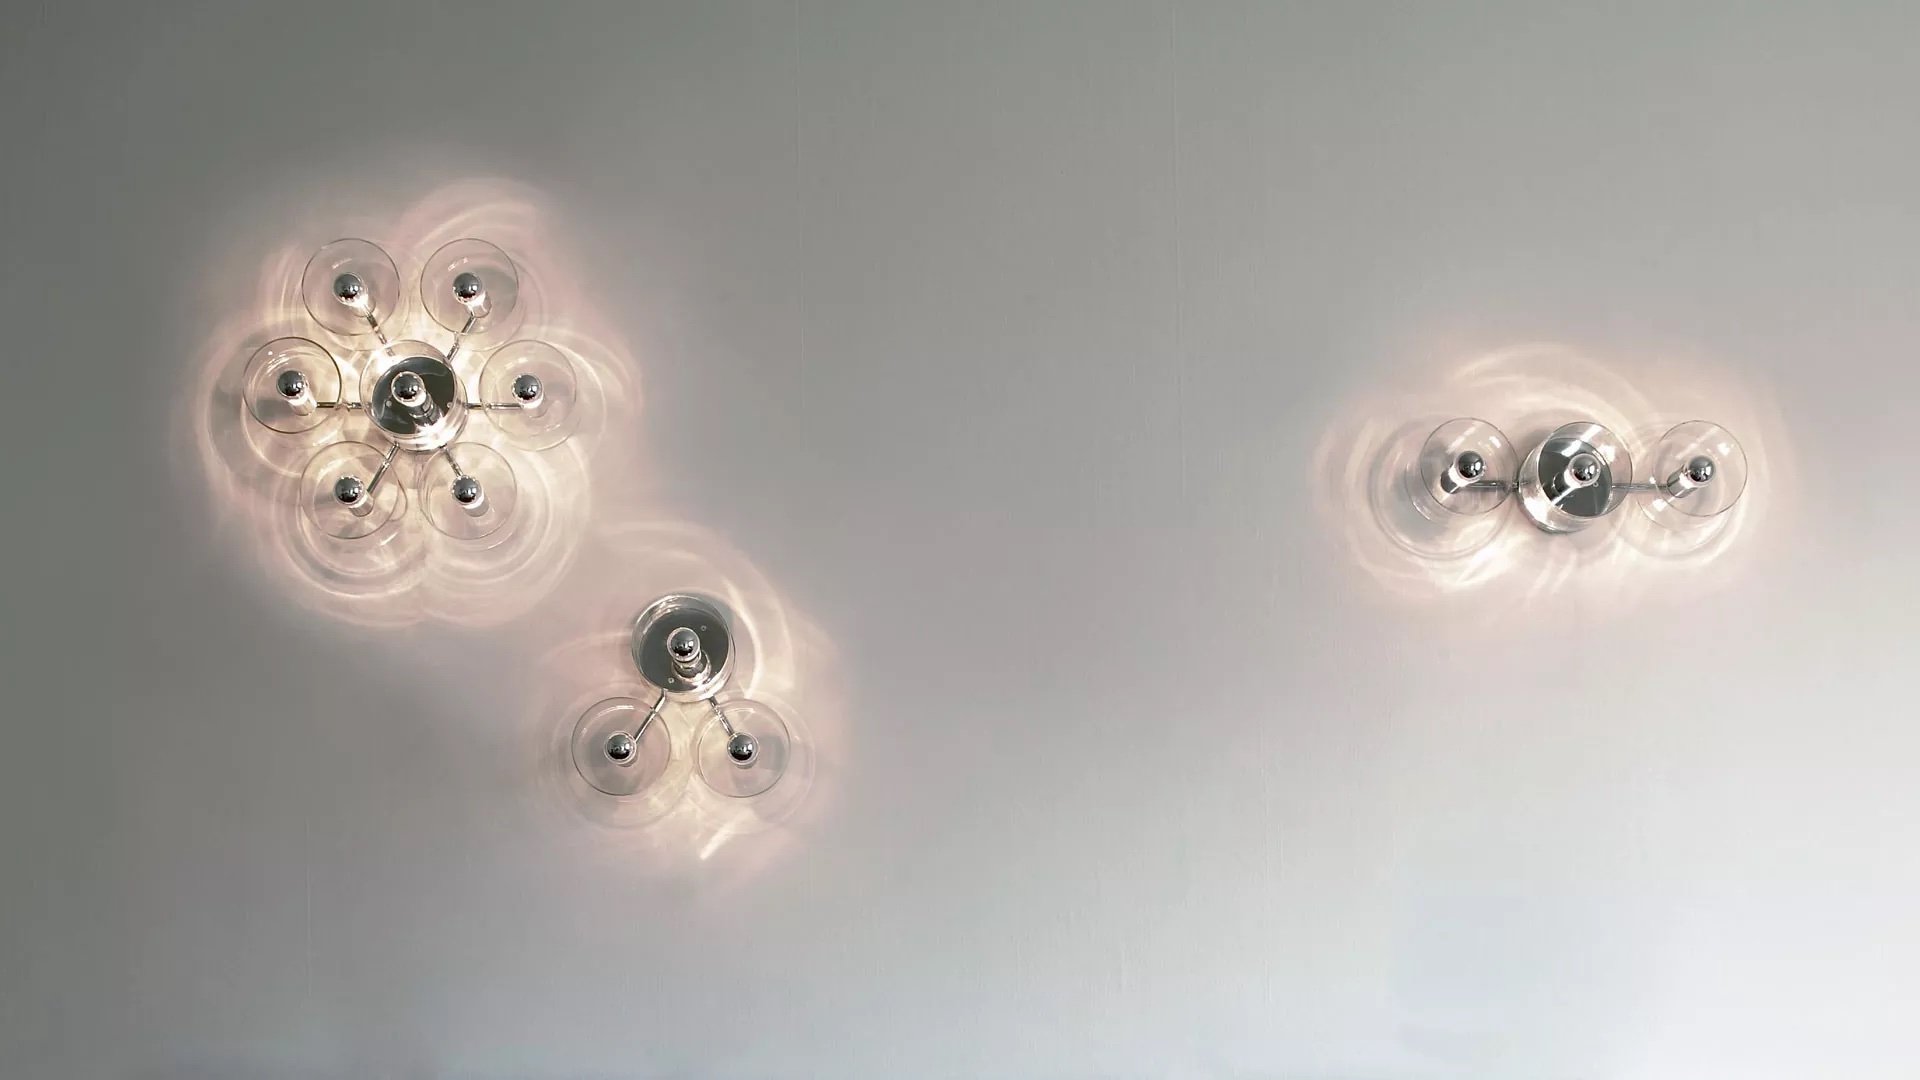 Fiore Wall/Ceiling Lamp lighting from Oluce, designed by Marta Laudani and Marco Romanelli